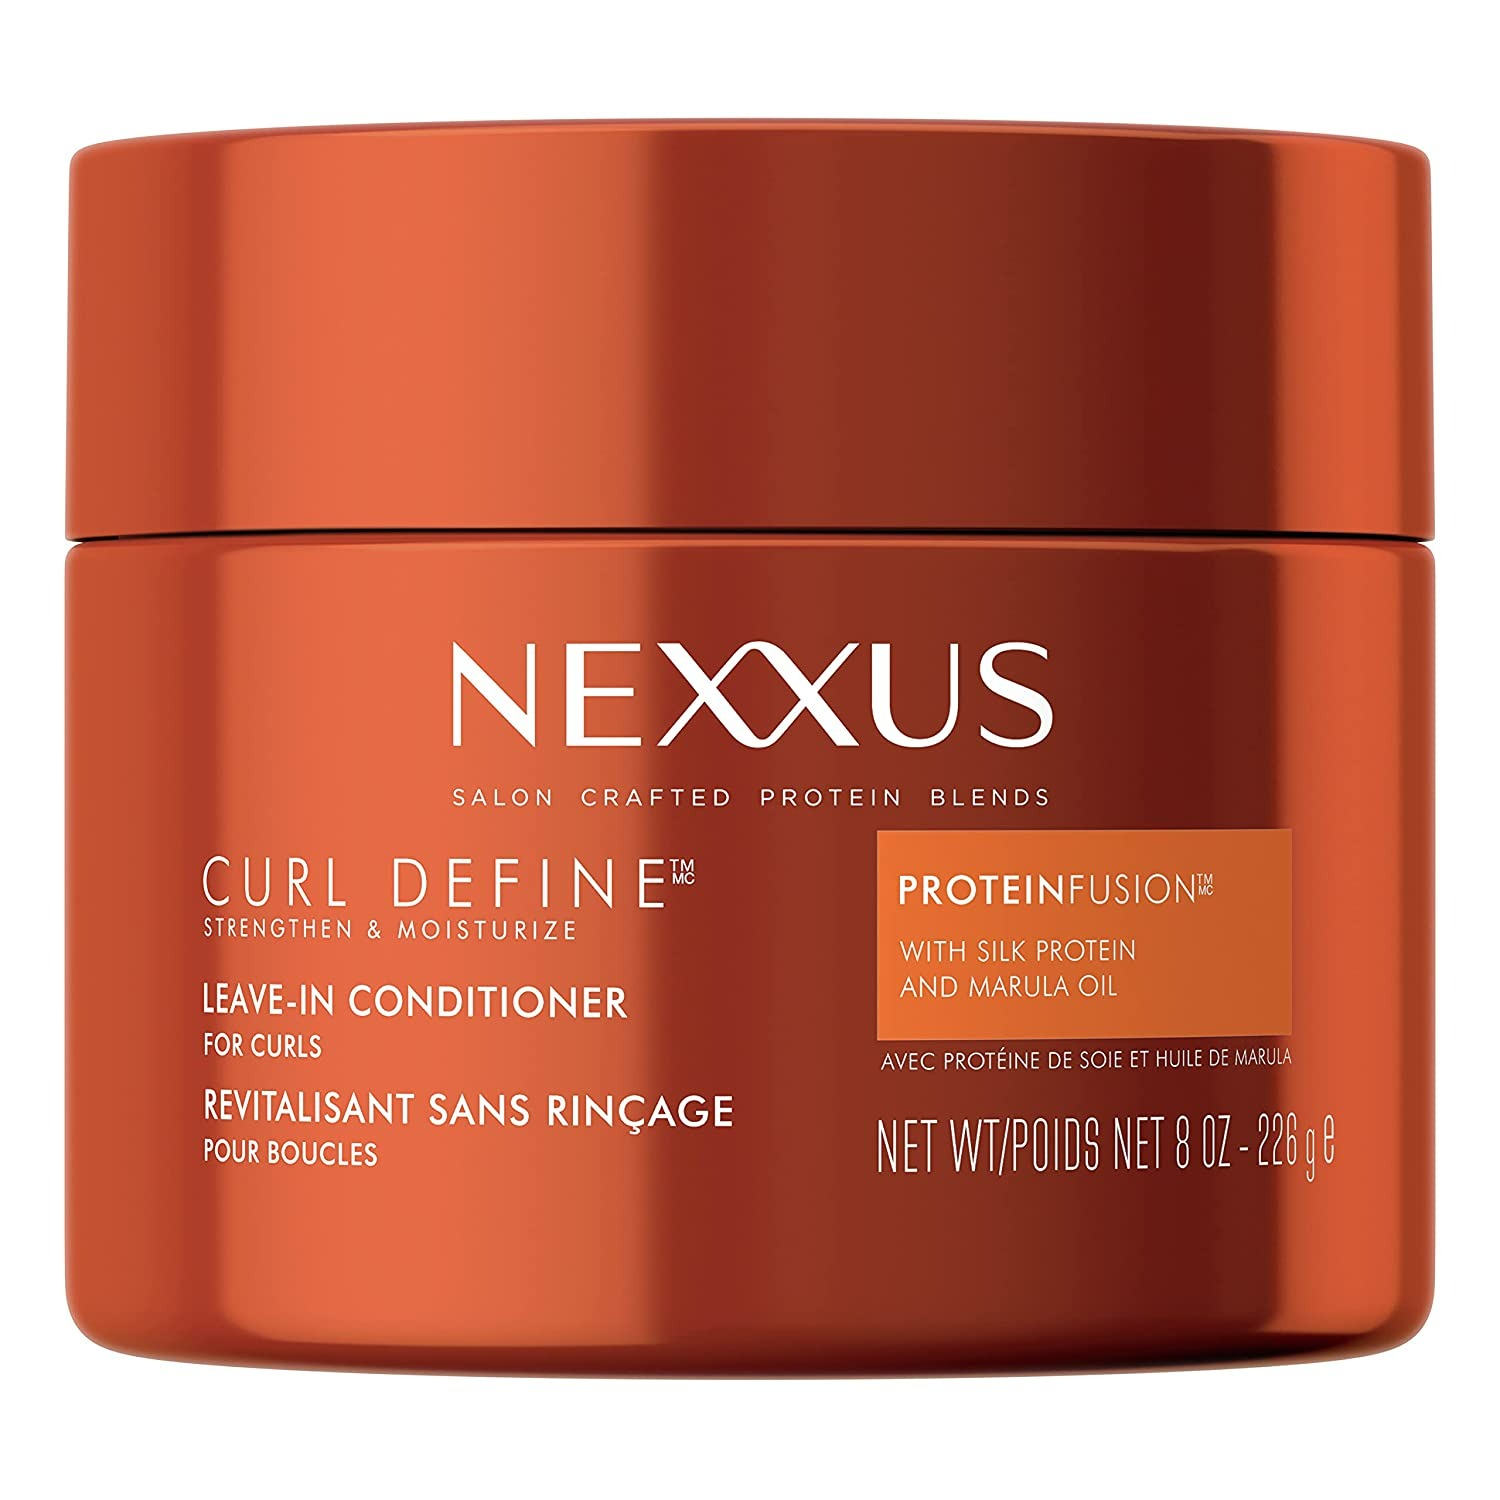 Nexxus Curl Define Leave-in Conditioner for Curly Hair - 8 Oz